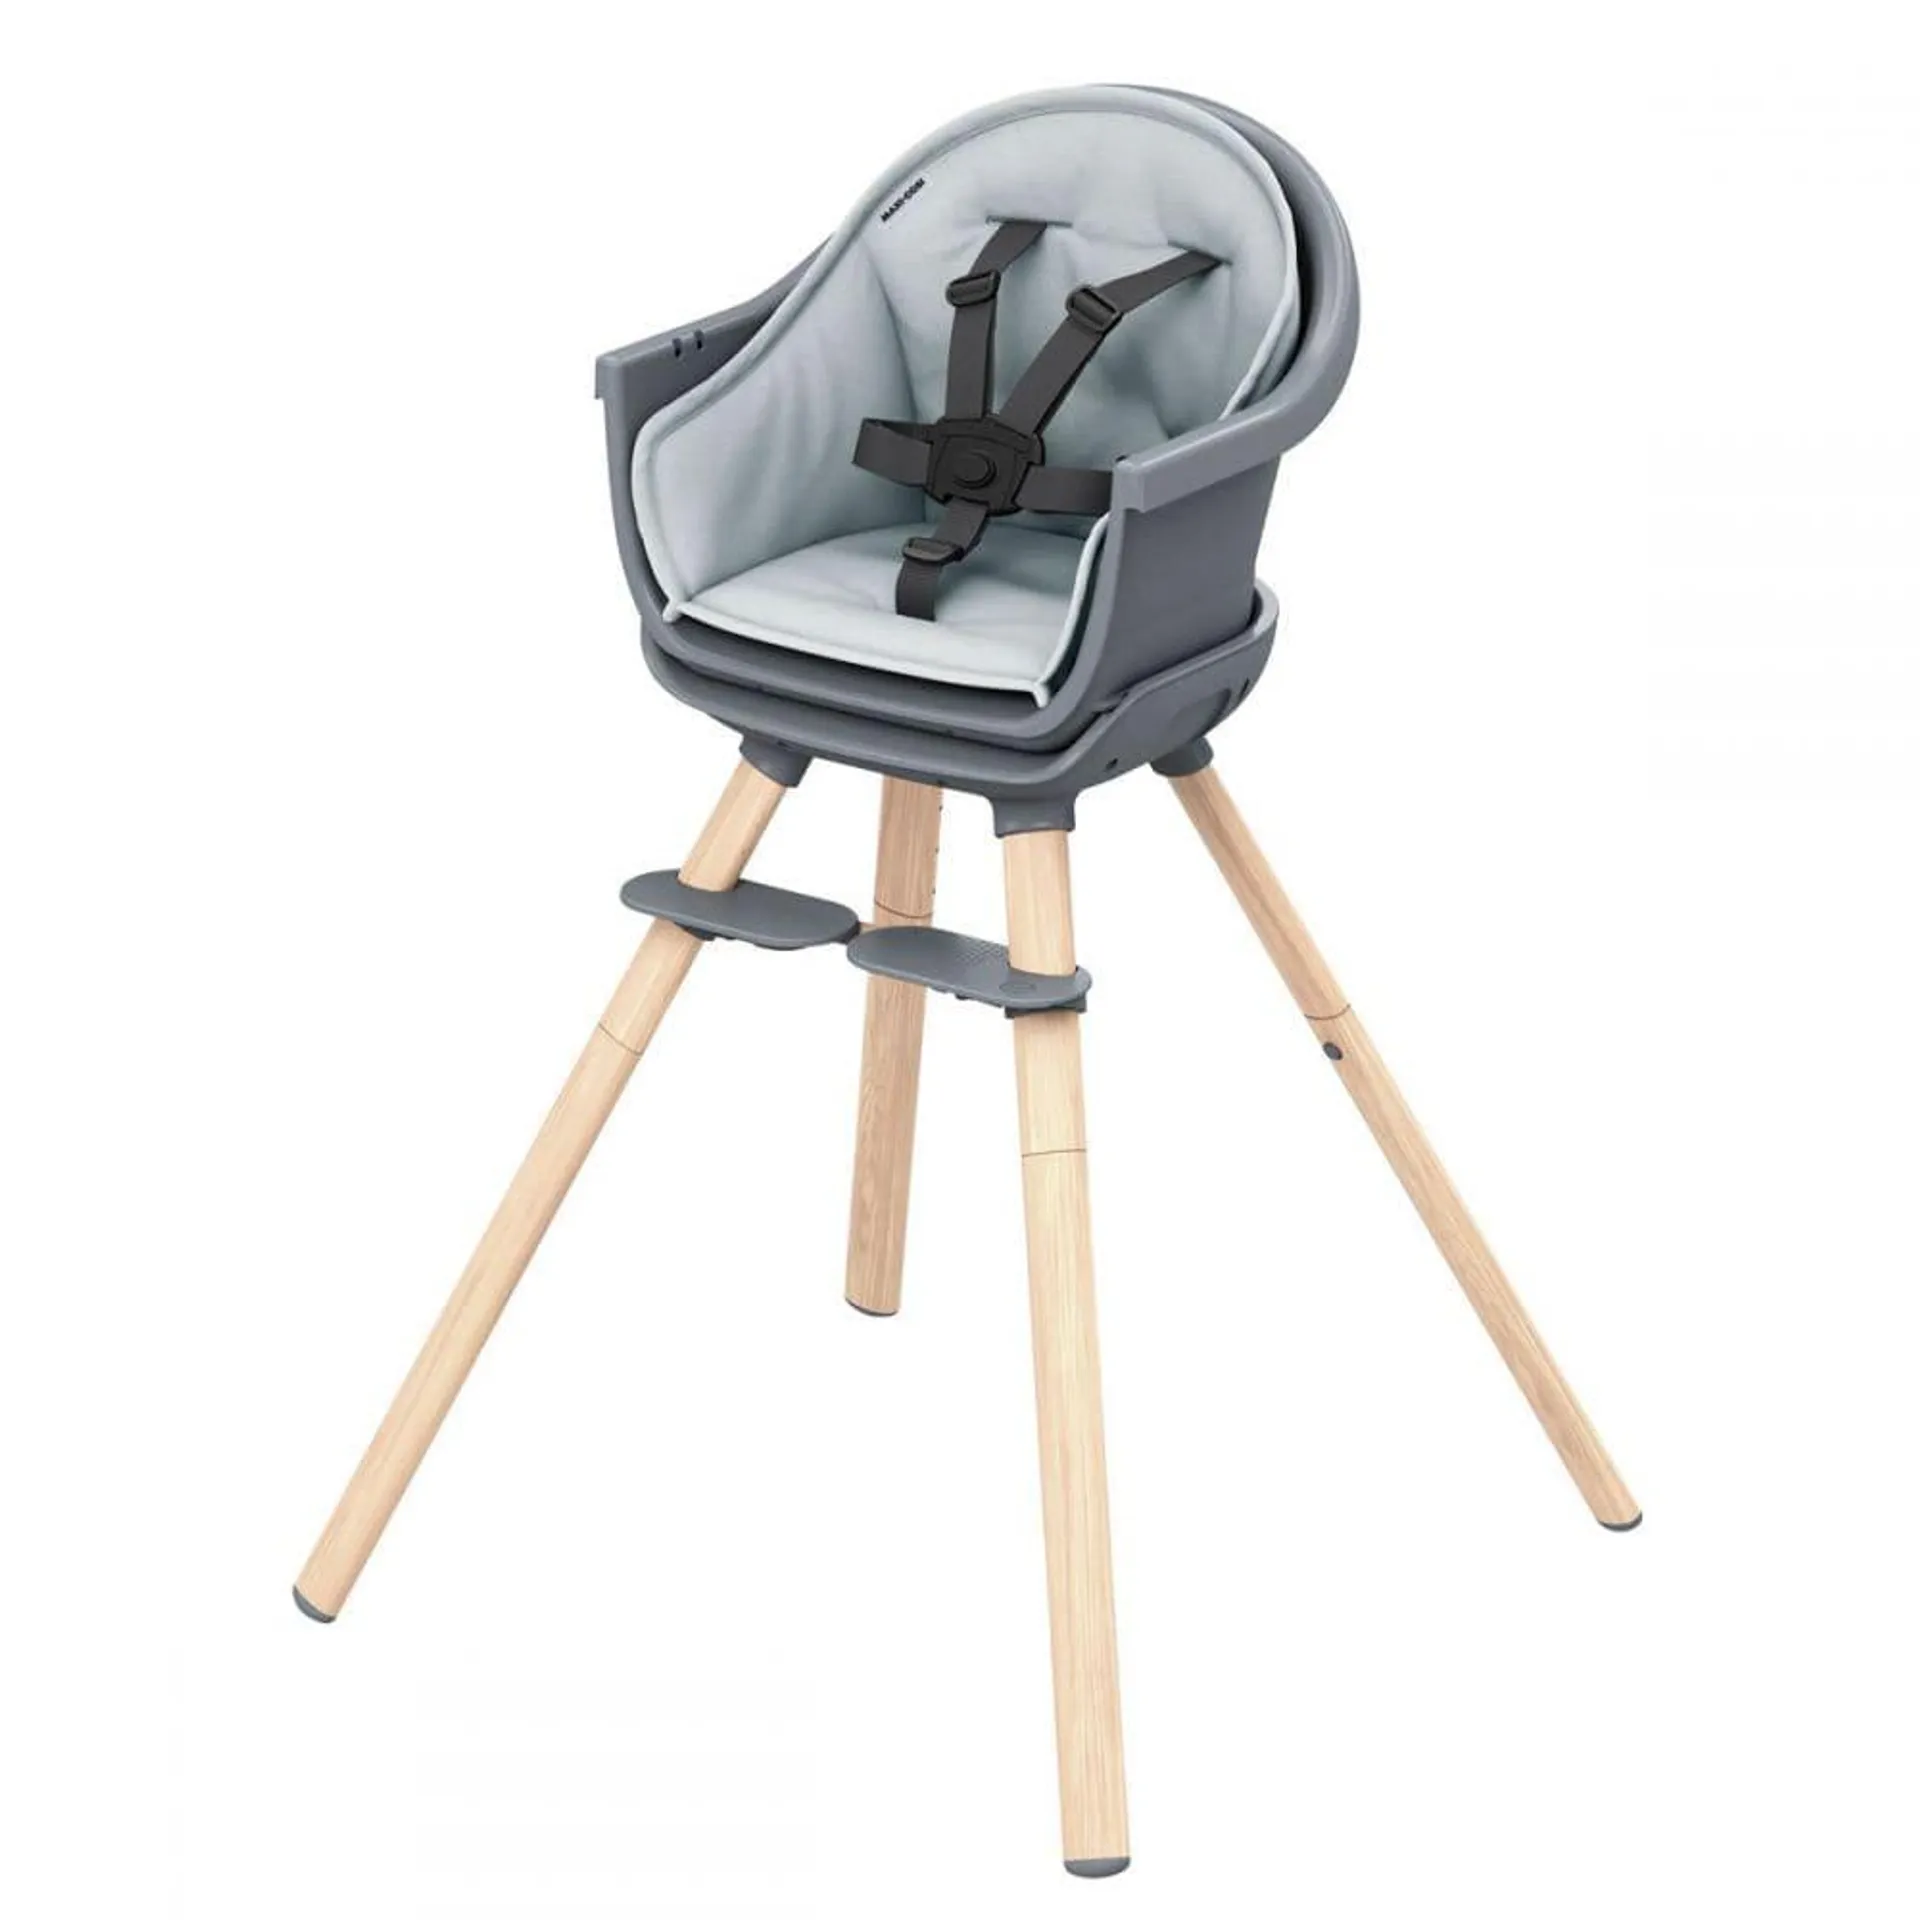 Maxi-Cosi Moa 8-in-1 Highchair in Beyond Graphite